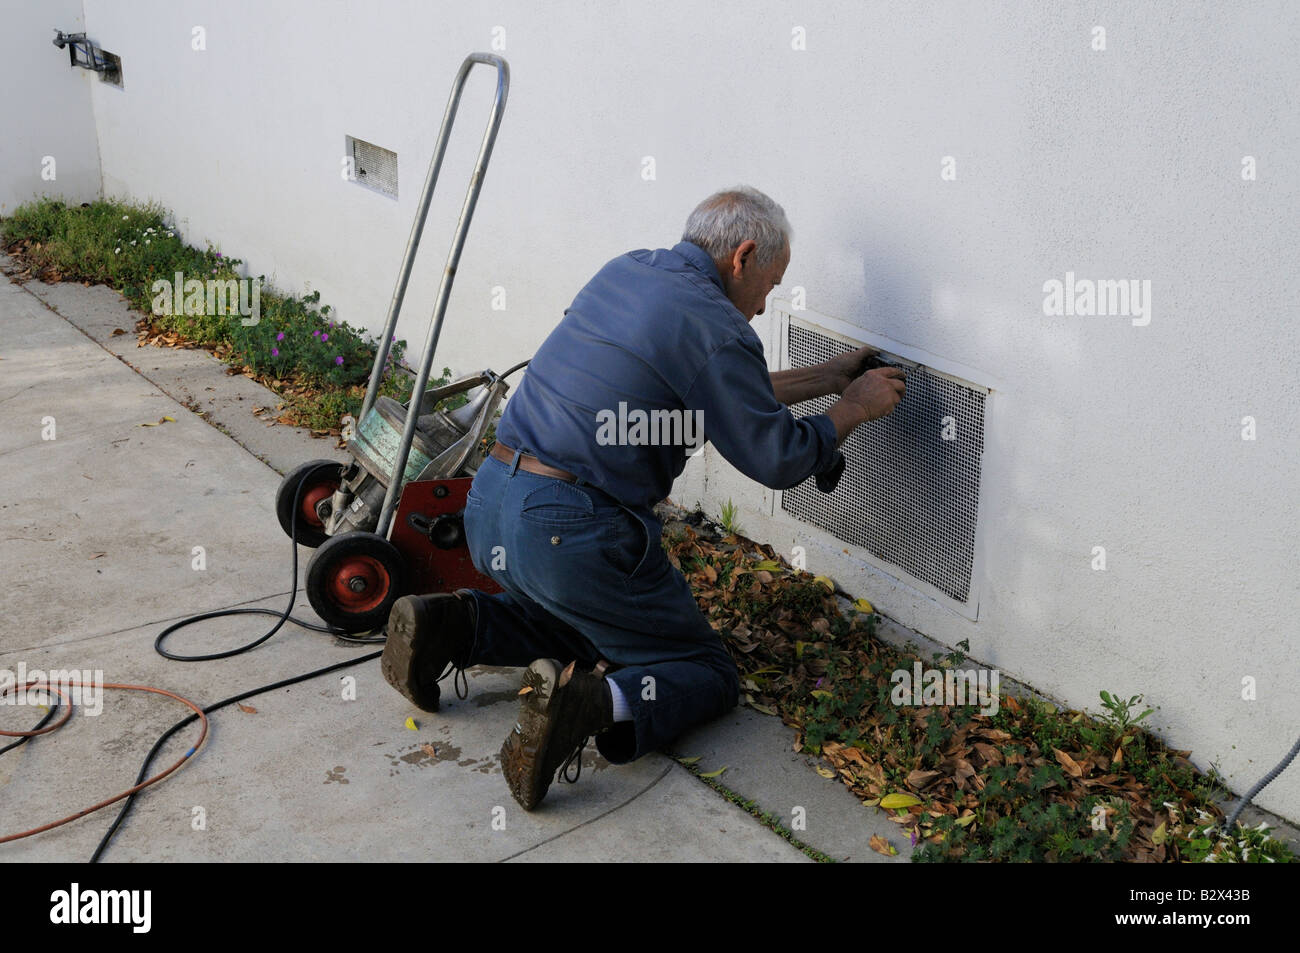 Plumber opening entrance to inspect pipes under house Stock Photo